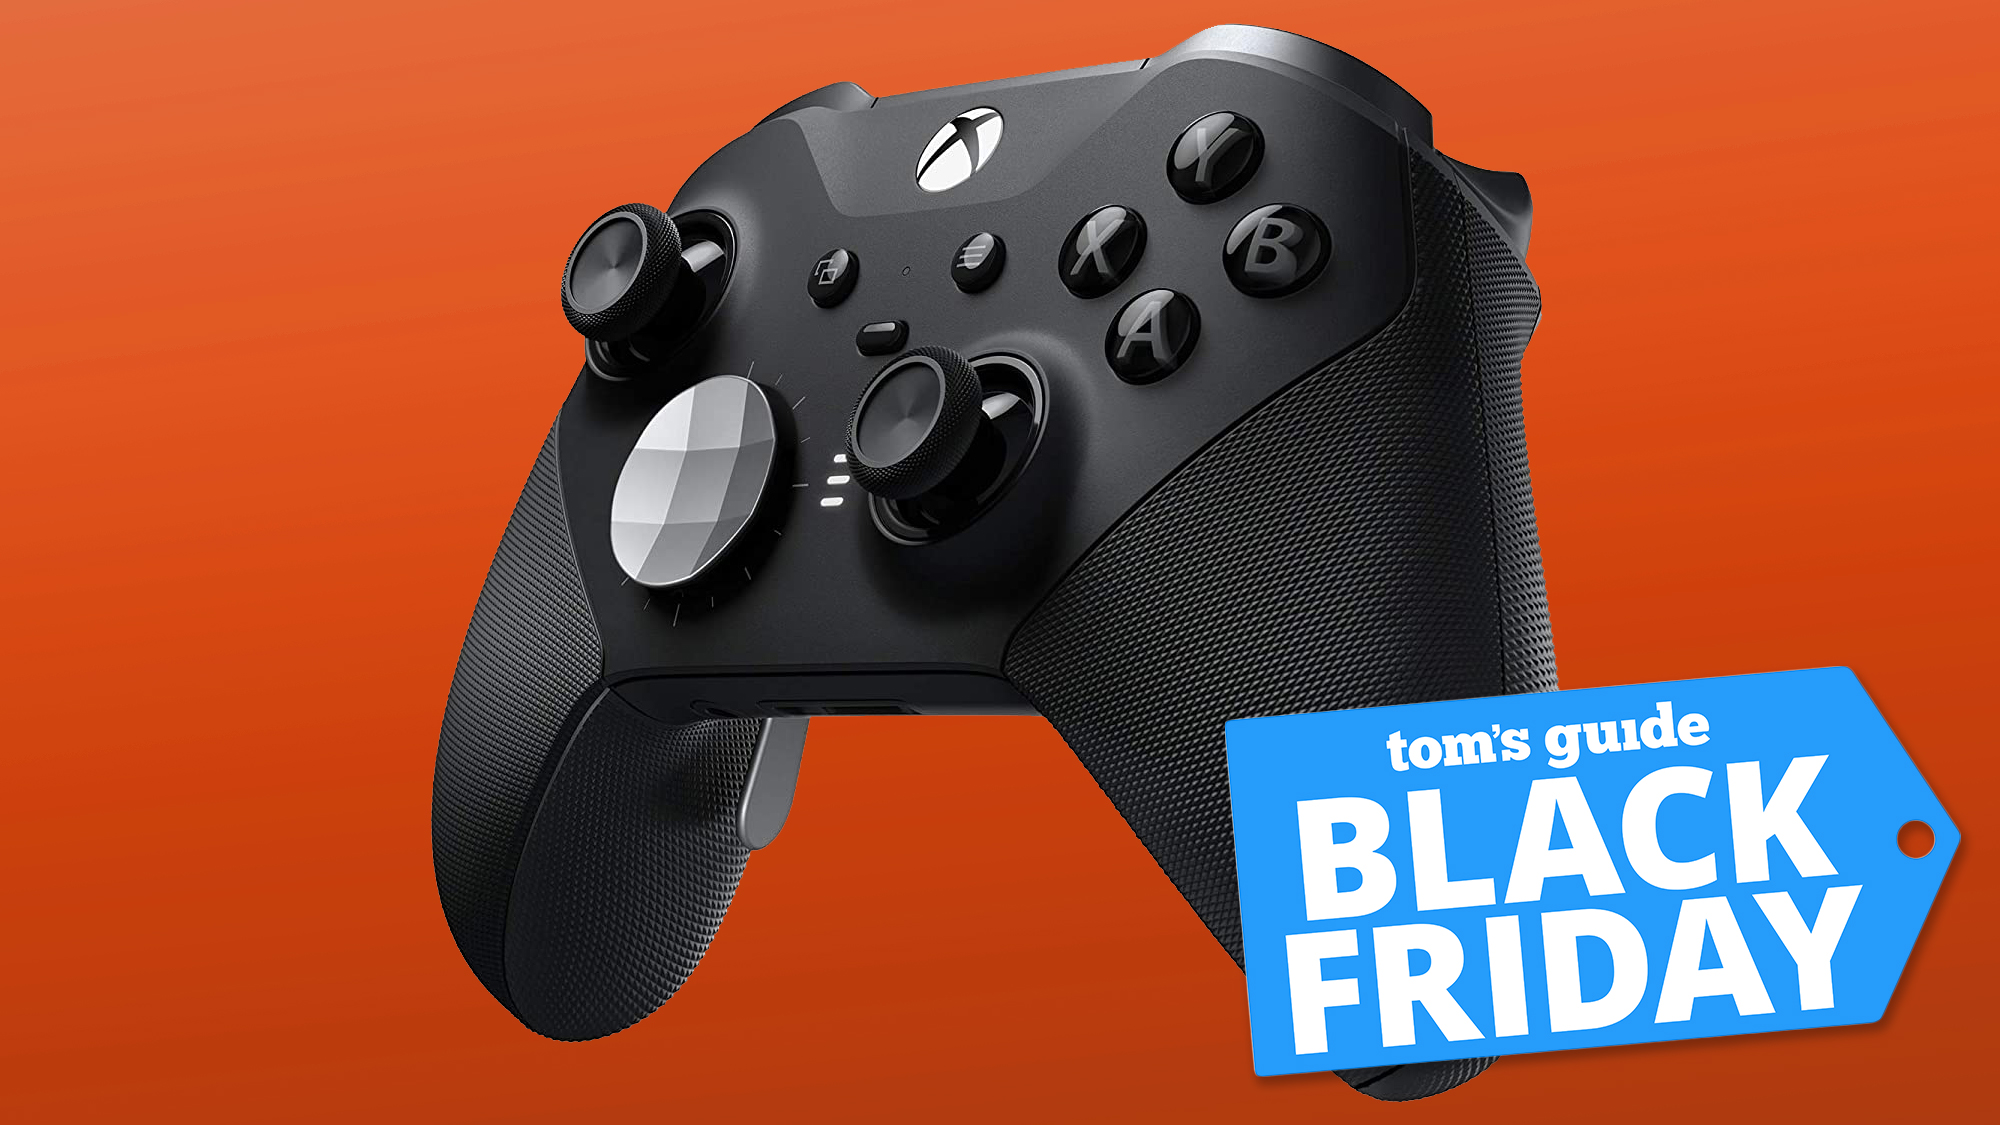 Xbox Black Friday deals include all time low console bundles and $20 off  controllers